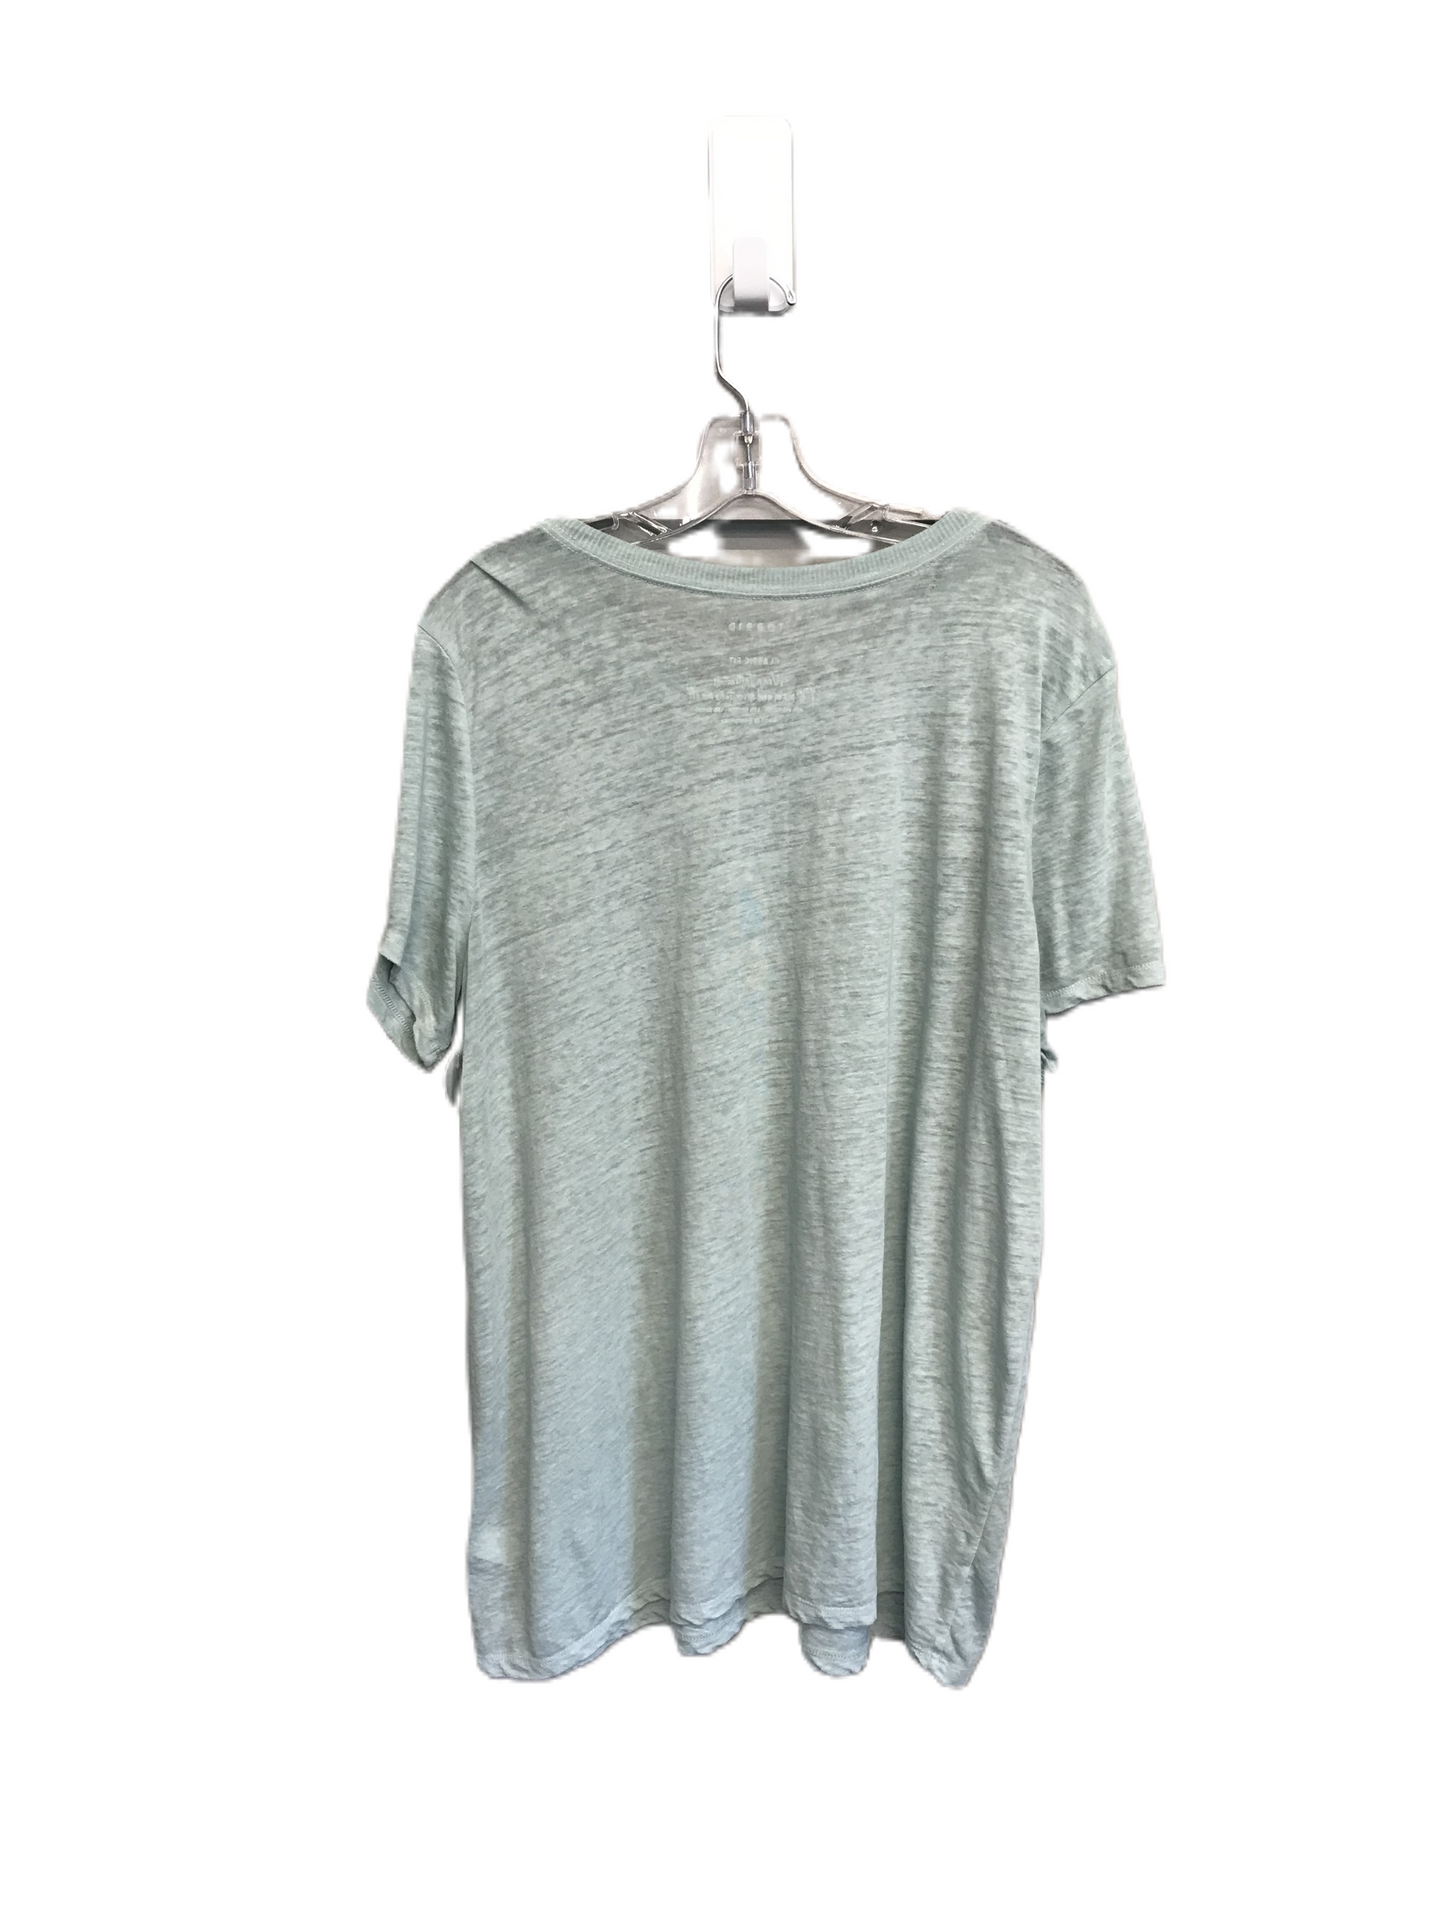 Green Top Short Sleeve By Torrid, Size: 1x